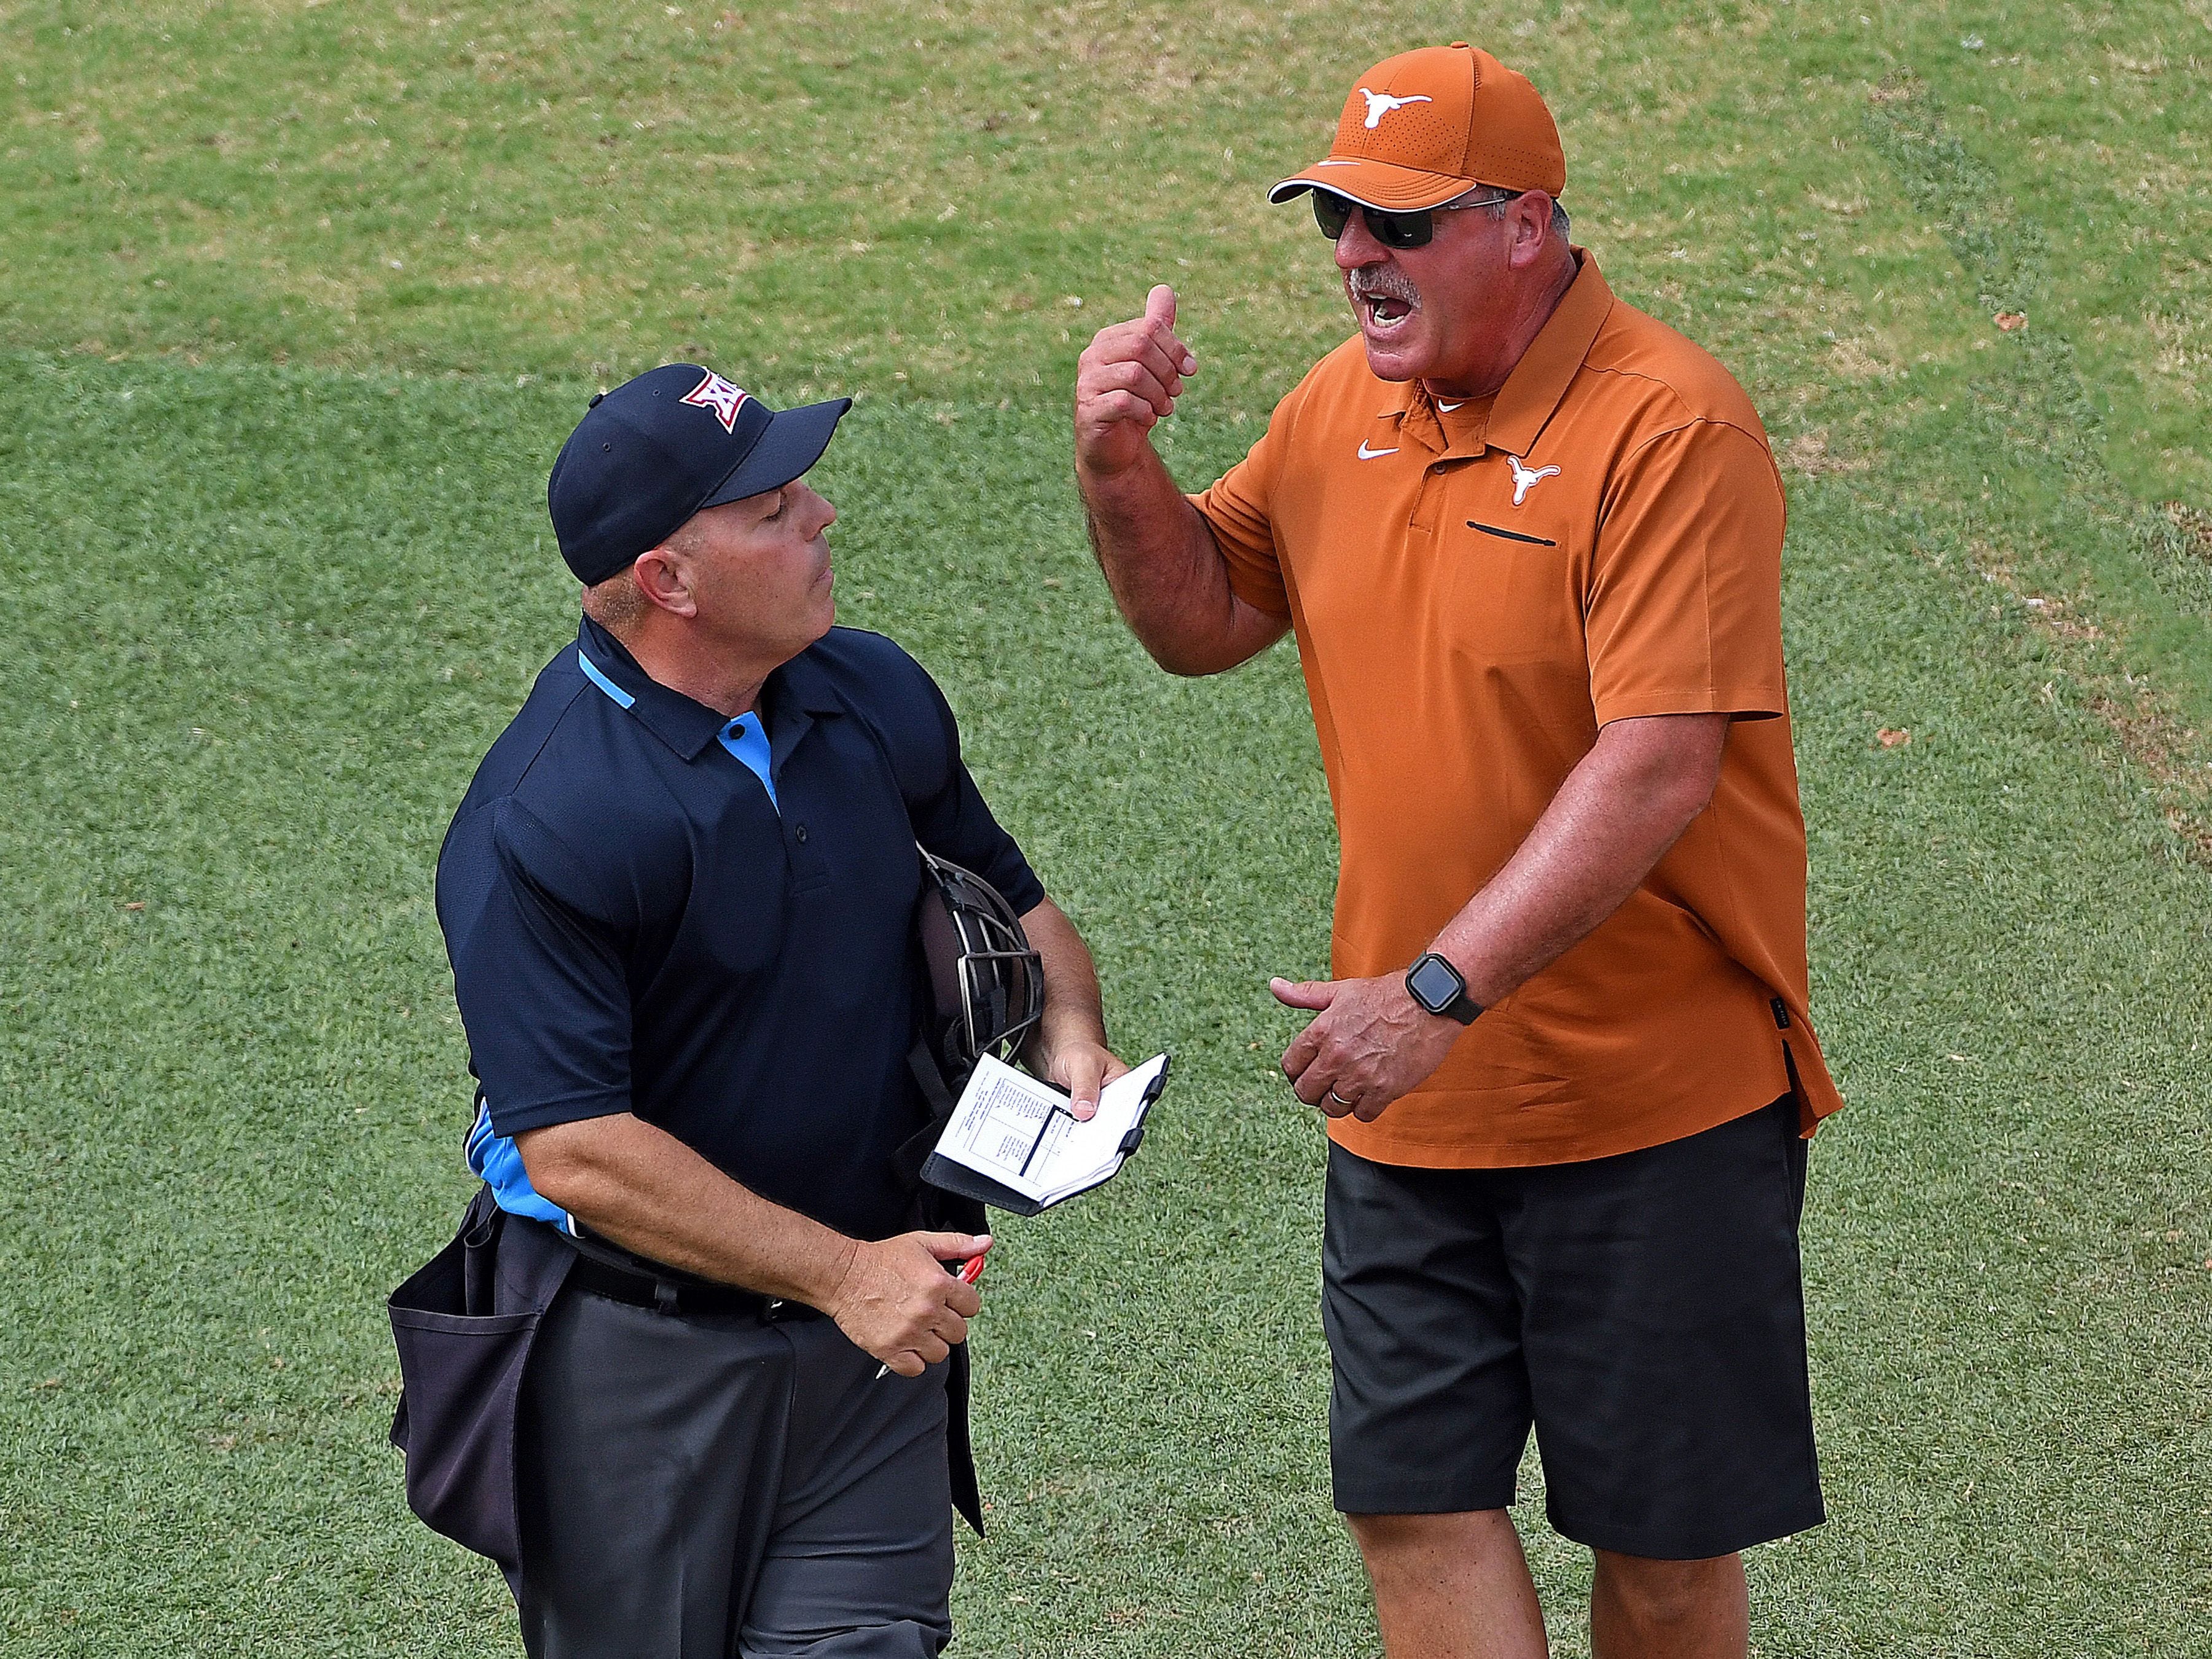 Texas softball coach Mike White faces criticism after using delay tactics